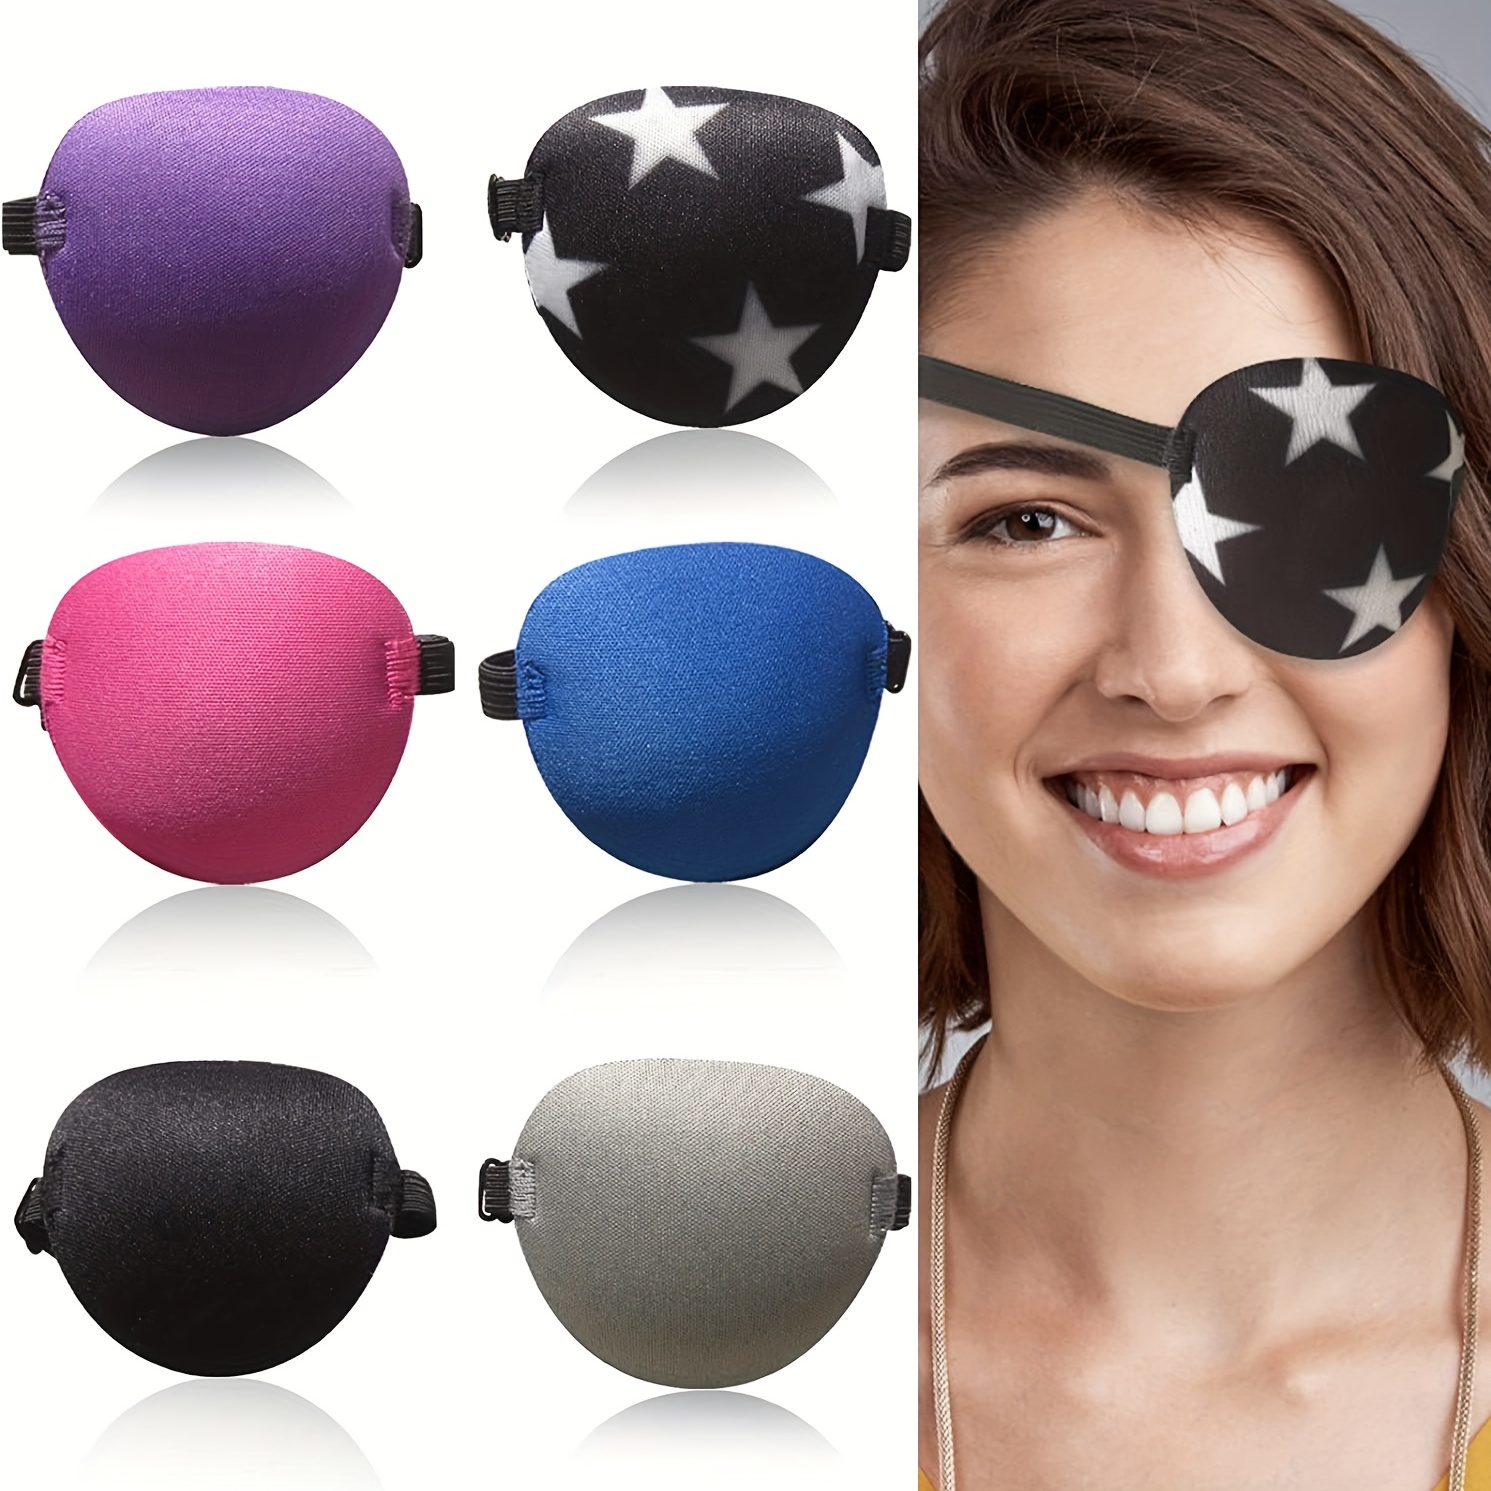 Pirate Eye Patch Adjustable for Cosplay Masquerade Adults Left Eye 